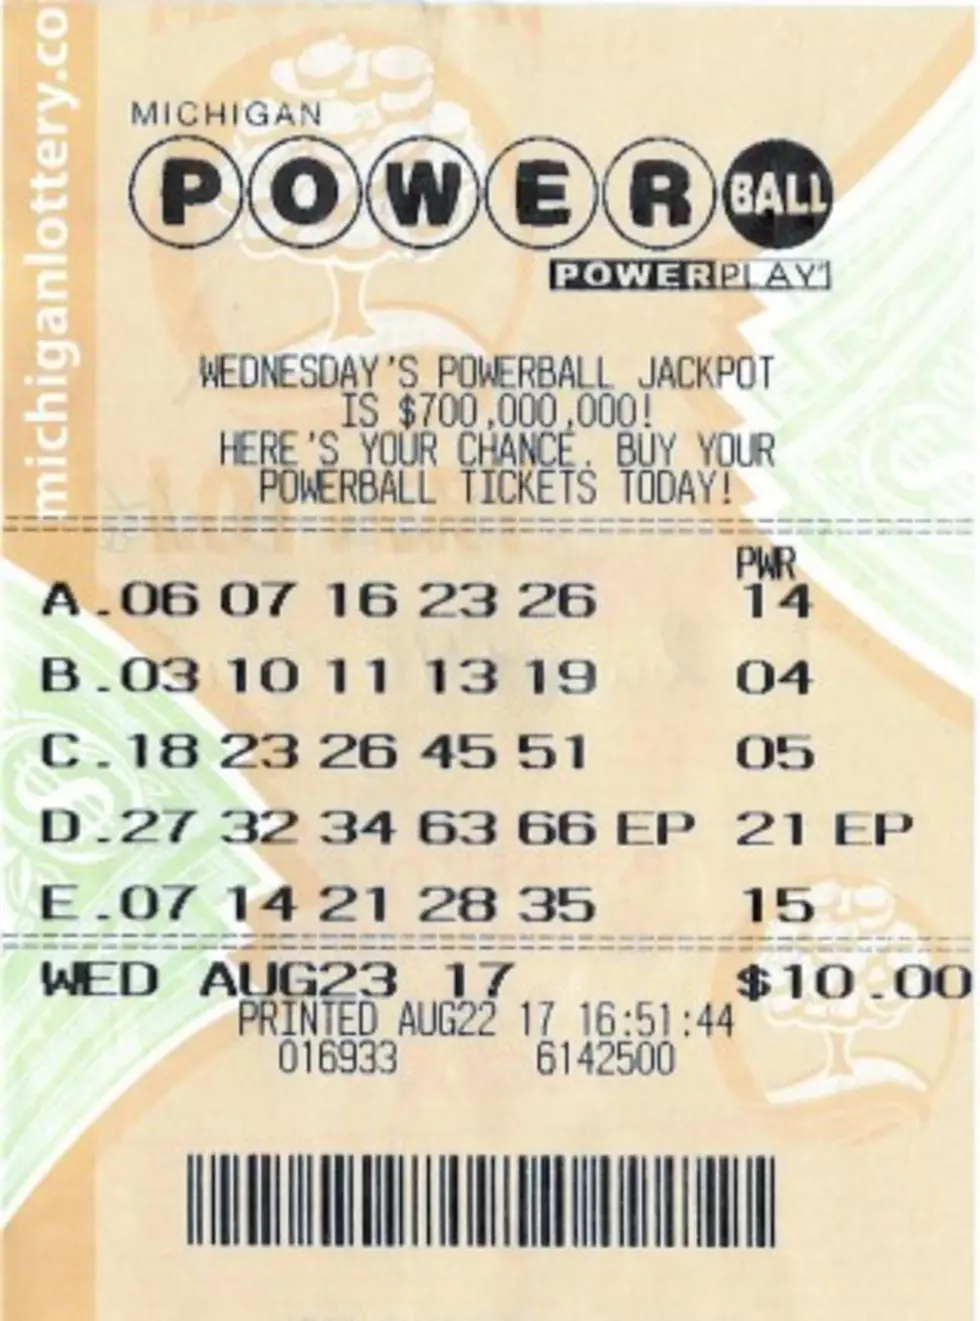 Fowlerville Area Lottery Group Claims Their $1 Million Powerball Prize